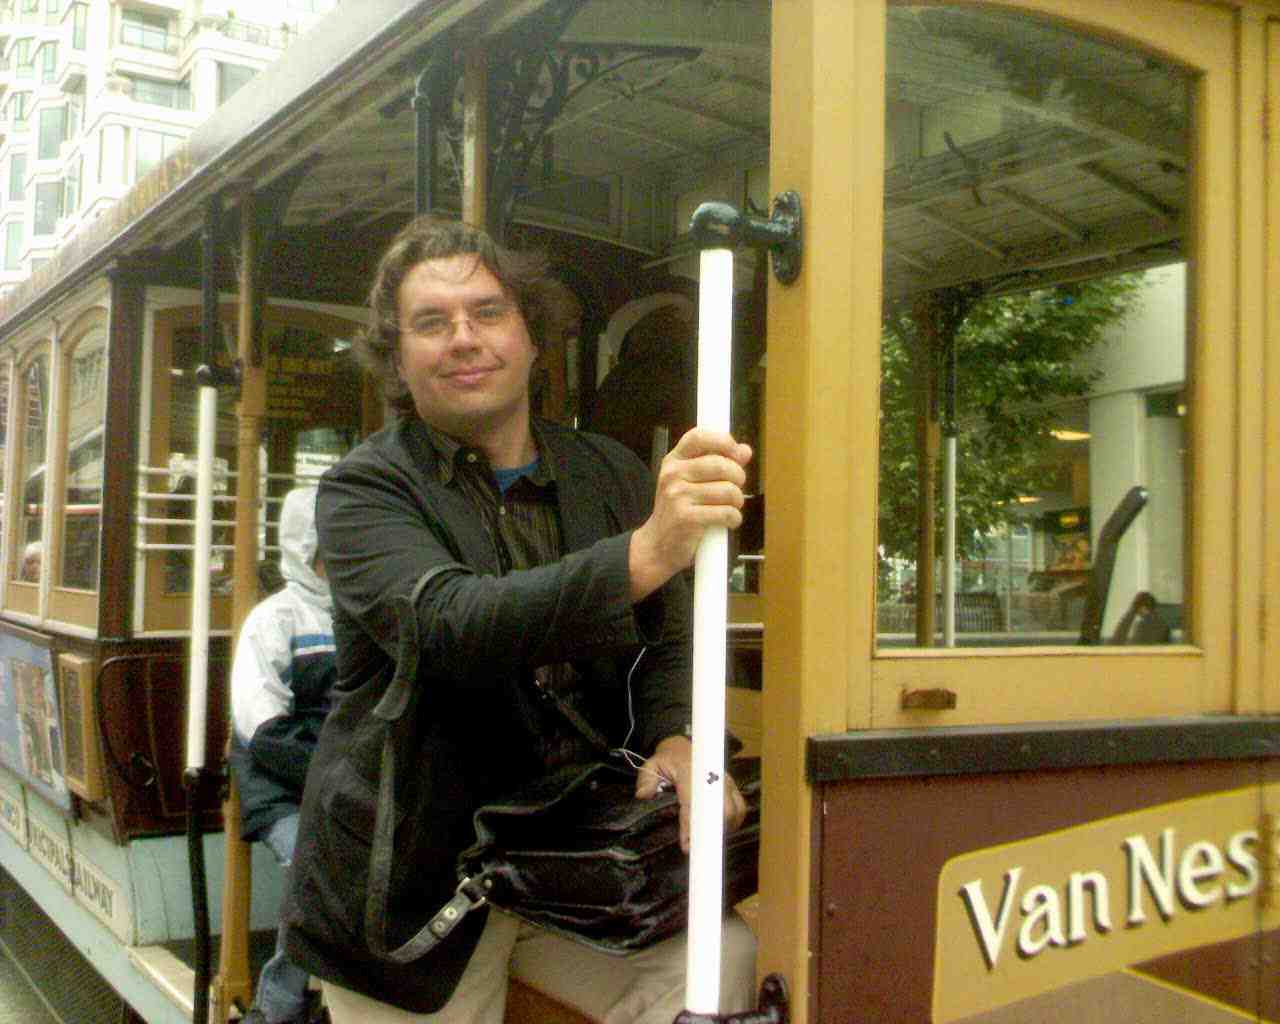 Perfunctory pic of me on SF cable car, Aug 17, 2005